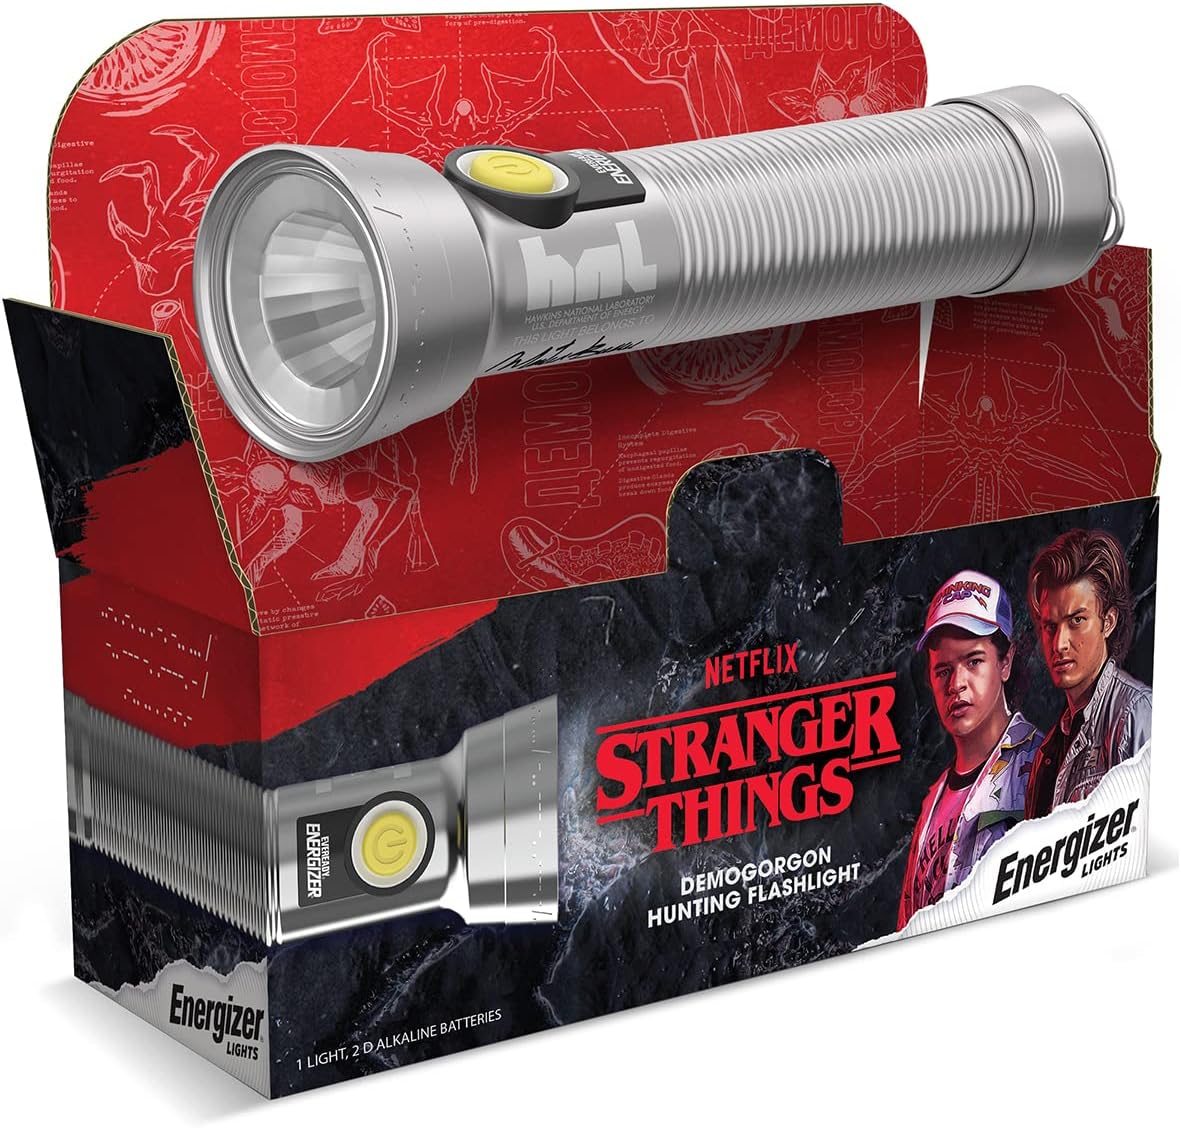 Amazon Prime Members: Stranger Things Energizer Demogorgon Hunting LED vintage Style Flashlight (Collector's Edition) $9.60 + Free Shipping